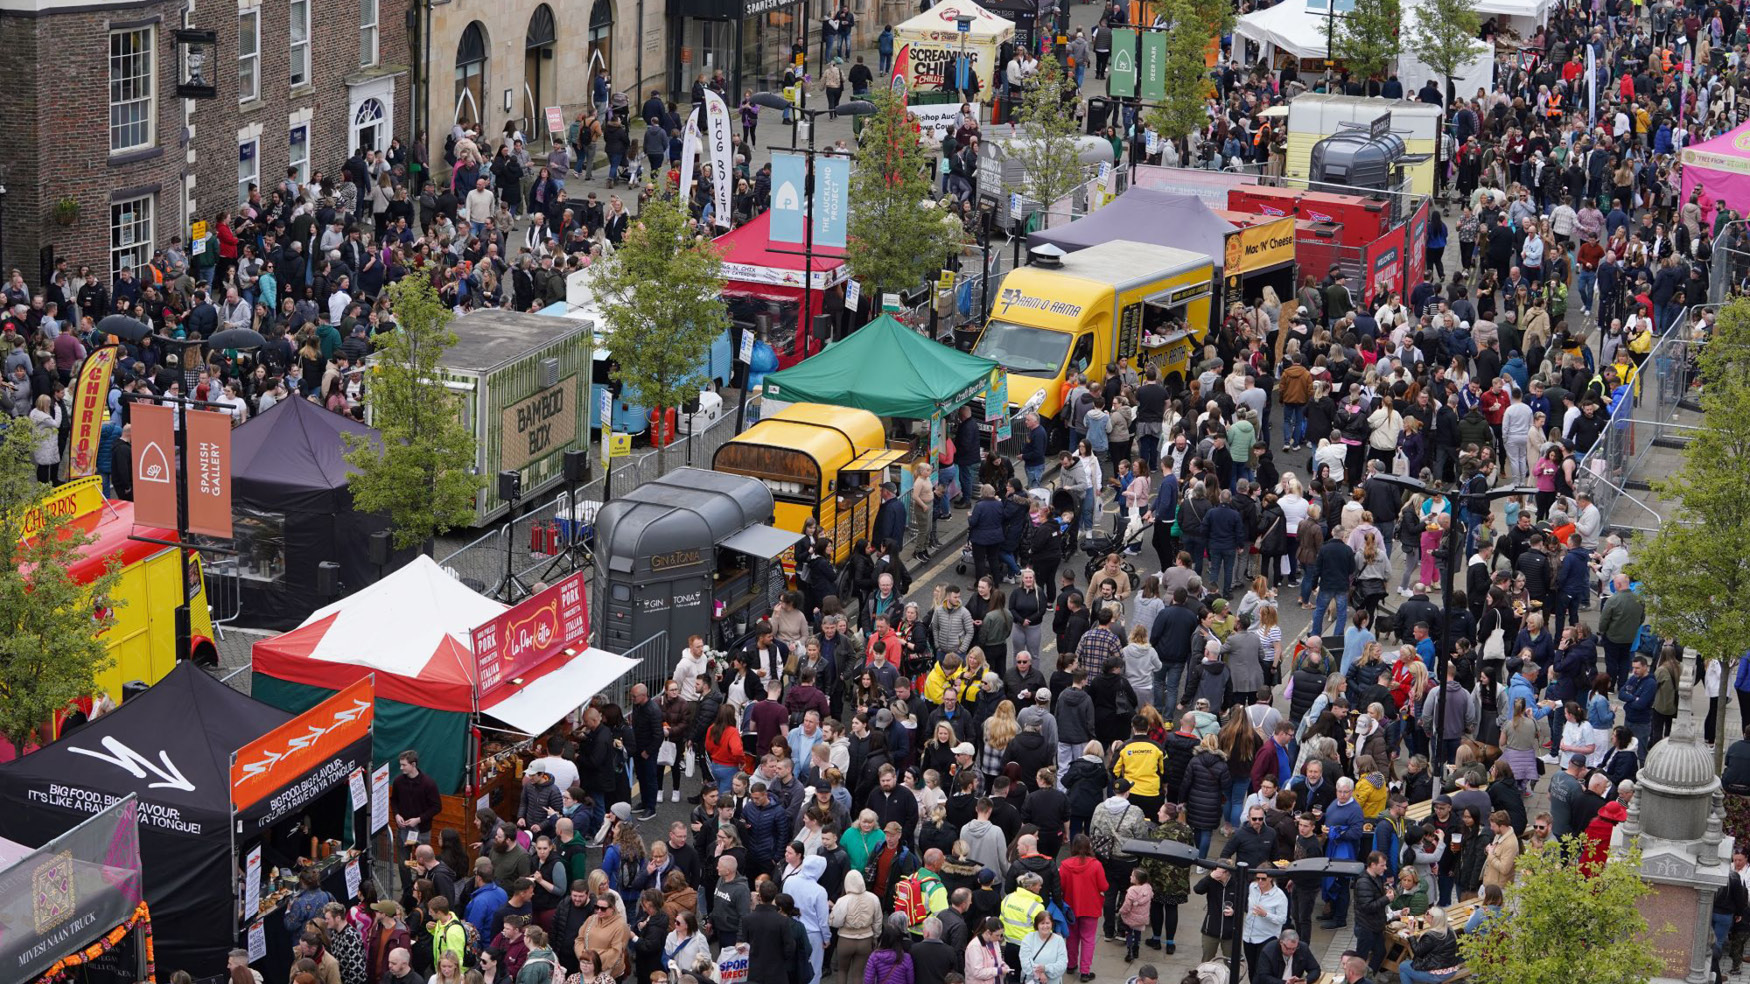  More than 150 traders confirmed for Bishop Auckland Food Festival